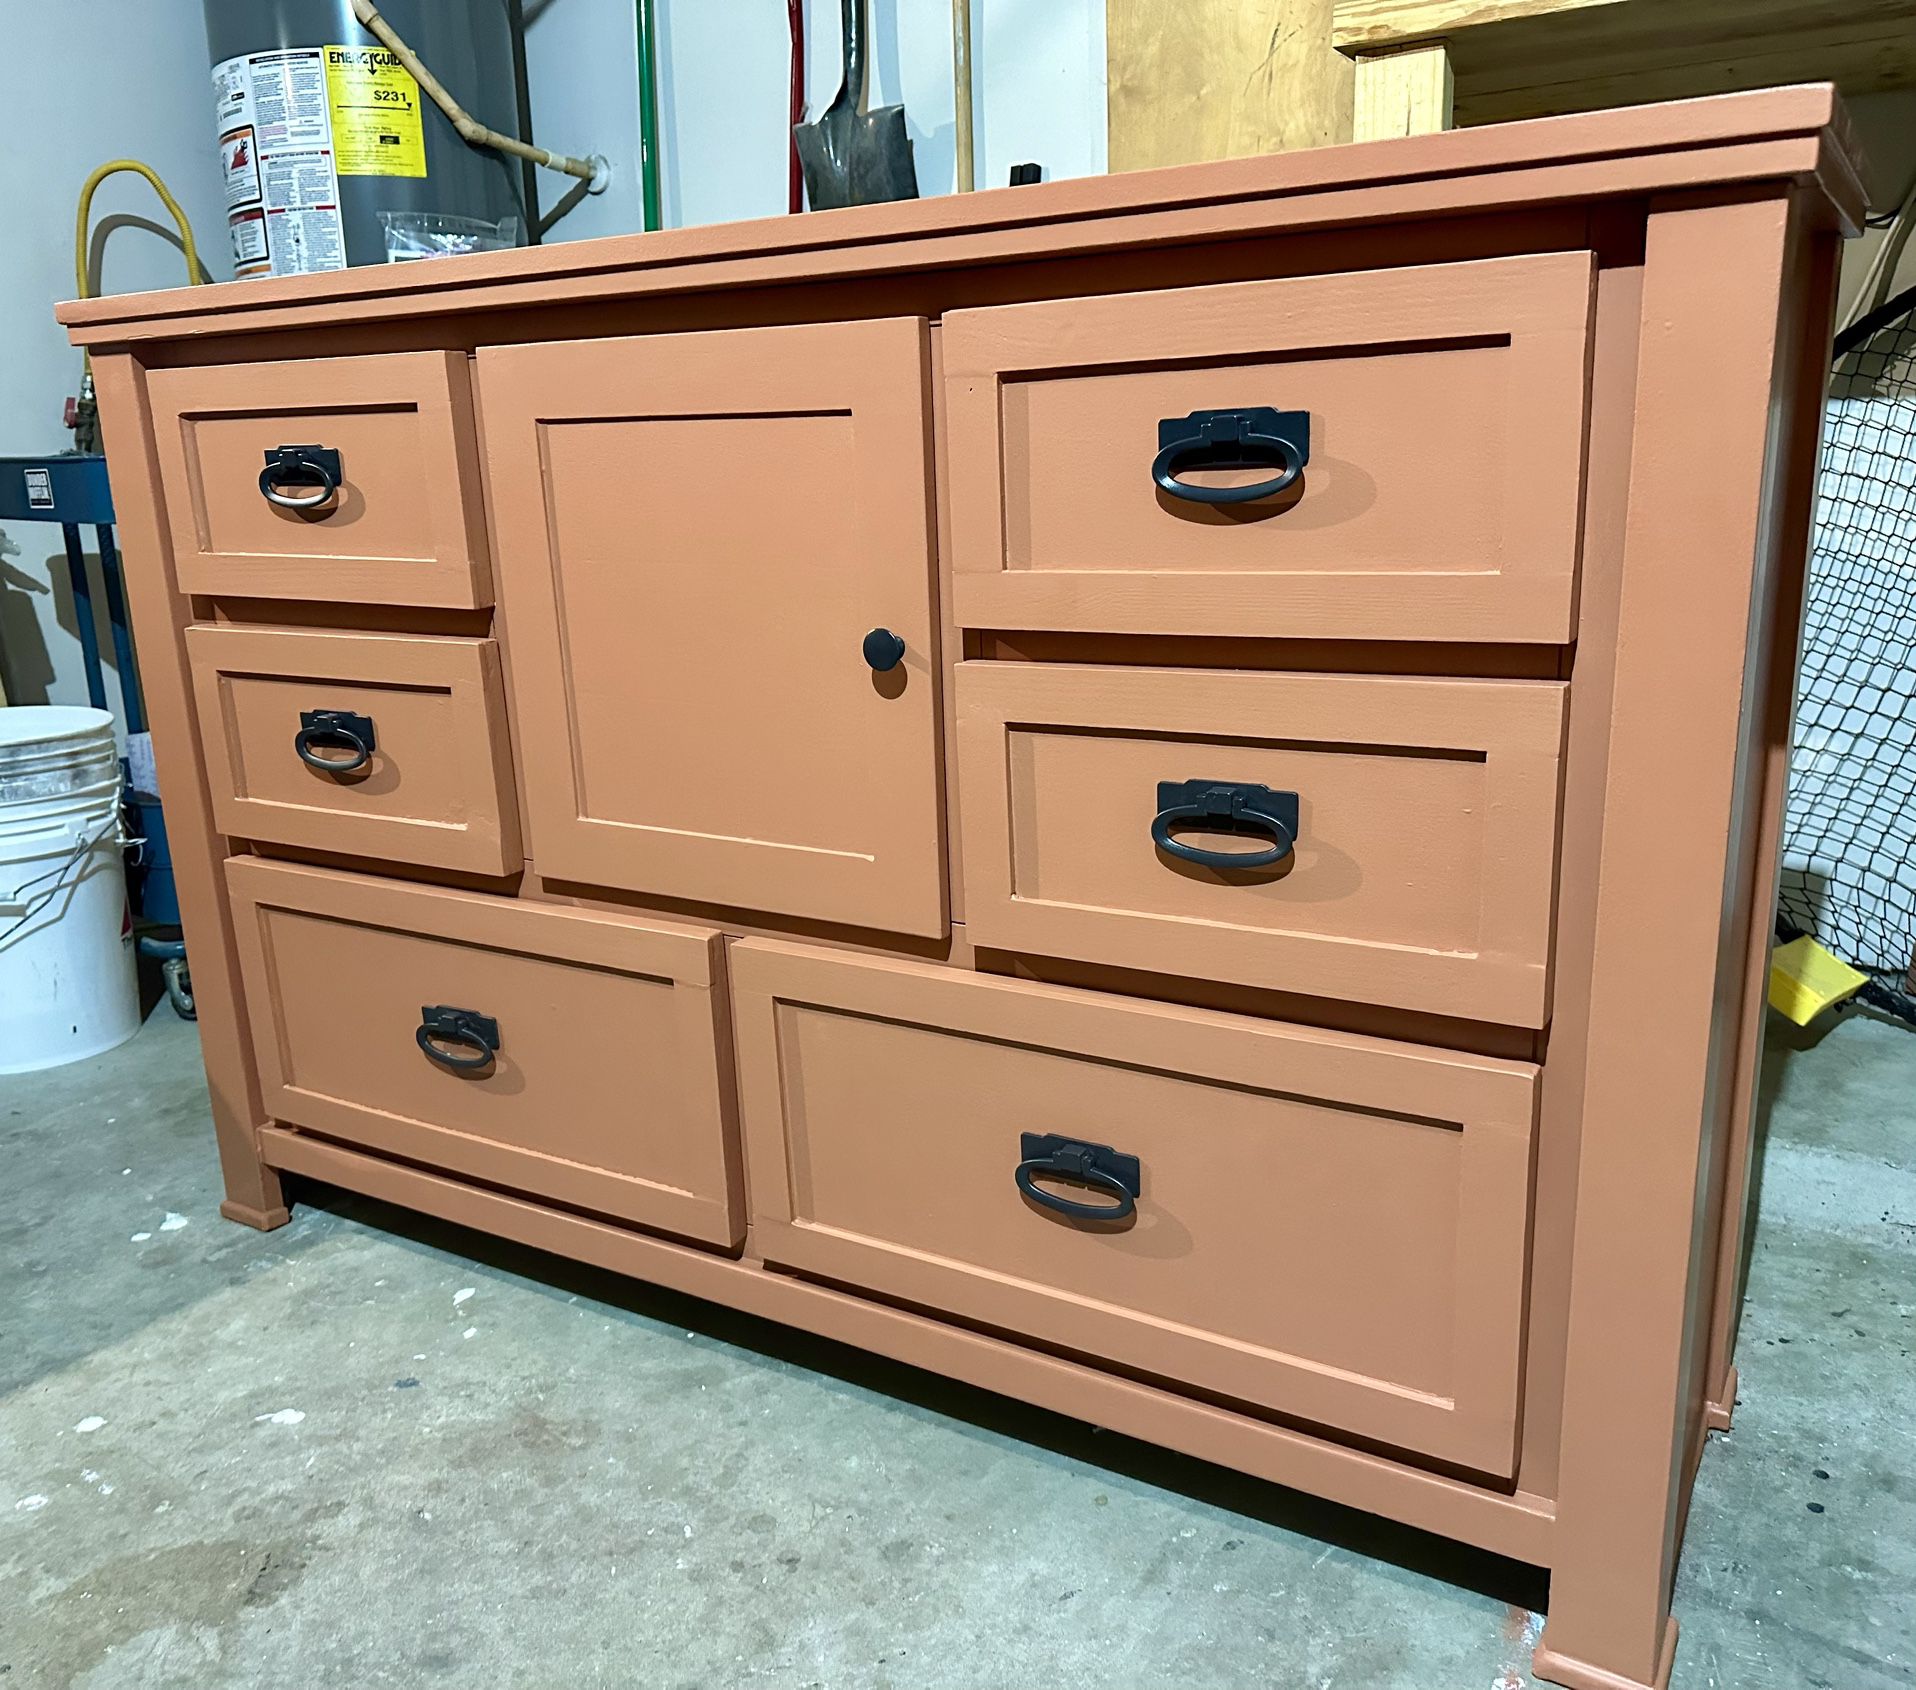 Solid Wood Dresser/Buffet - Refinished with SW Cavern Clay Color